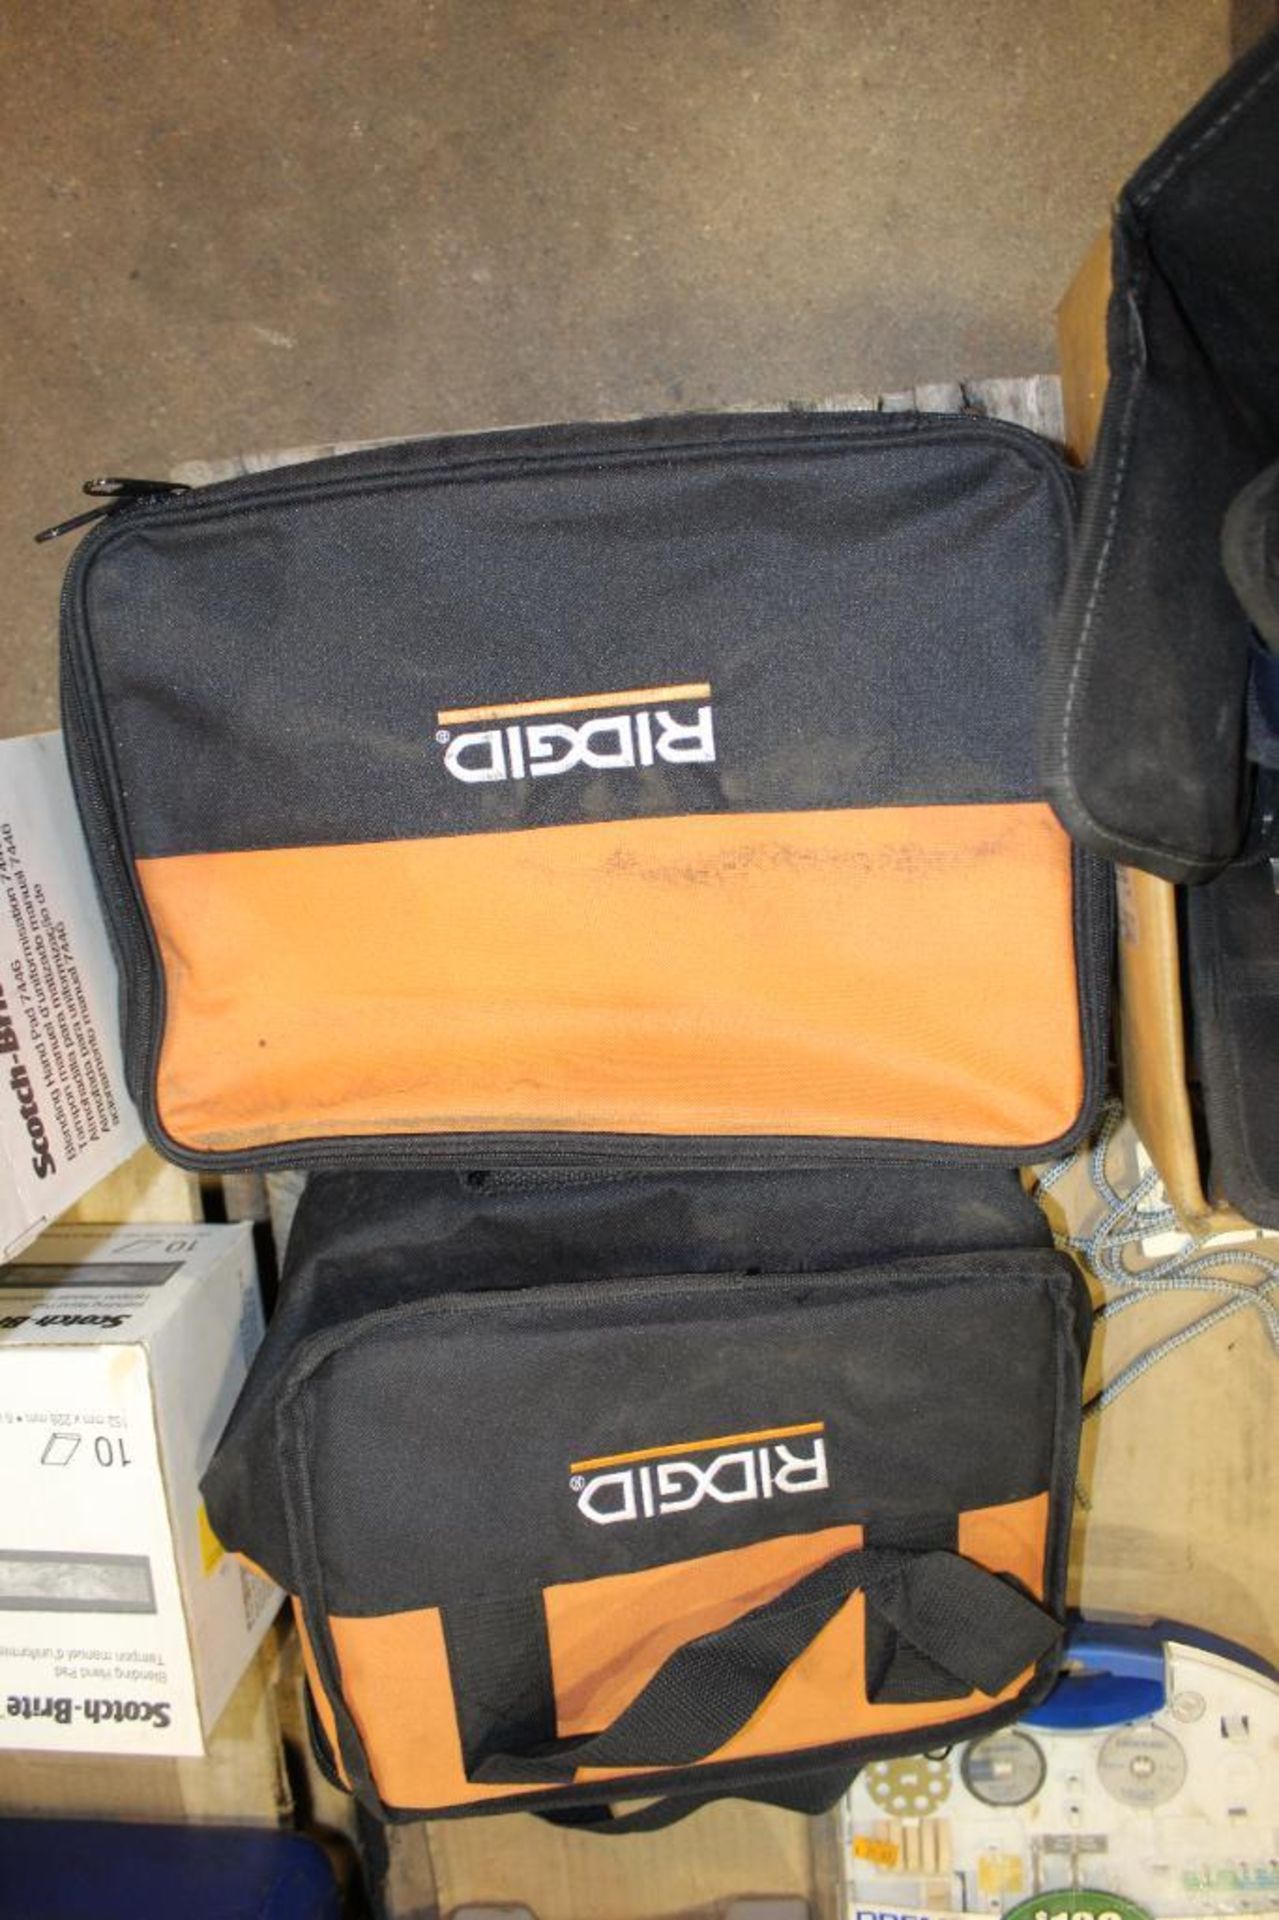 Lot of Ridgid Canvas Bags/Assorted Tool Holders, DeWalt Hardcase with (2) Battery Chargers, Ridgid A - Bild 4 aus 13